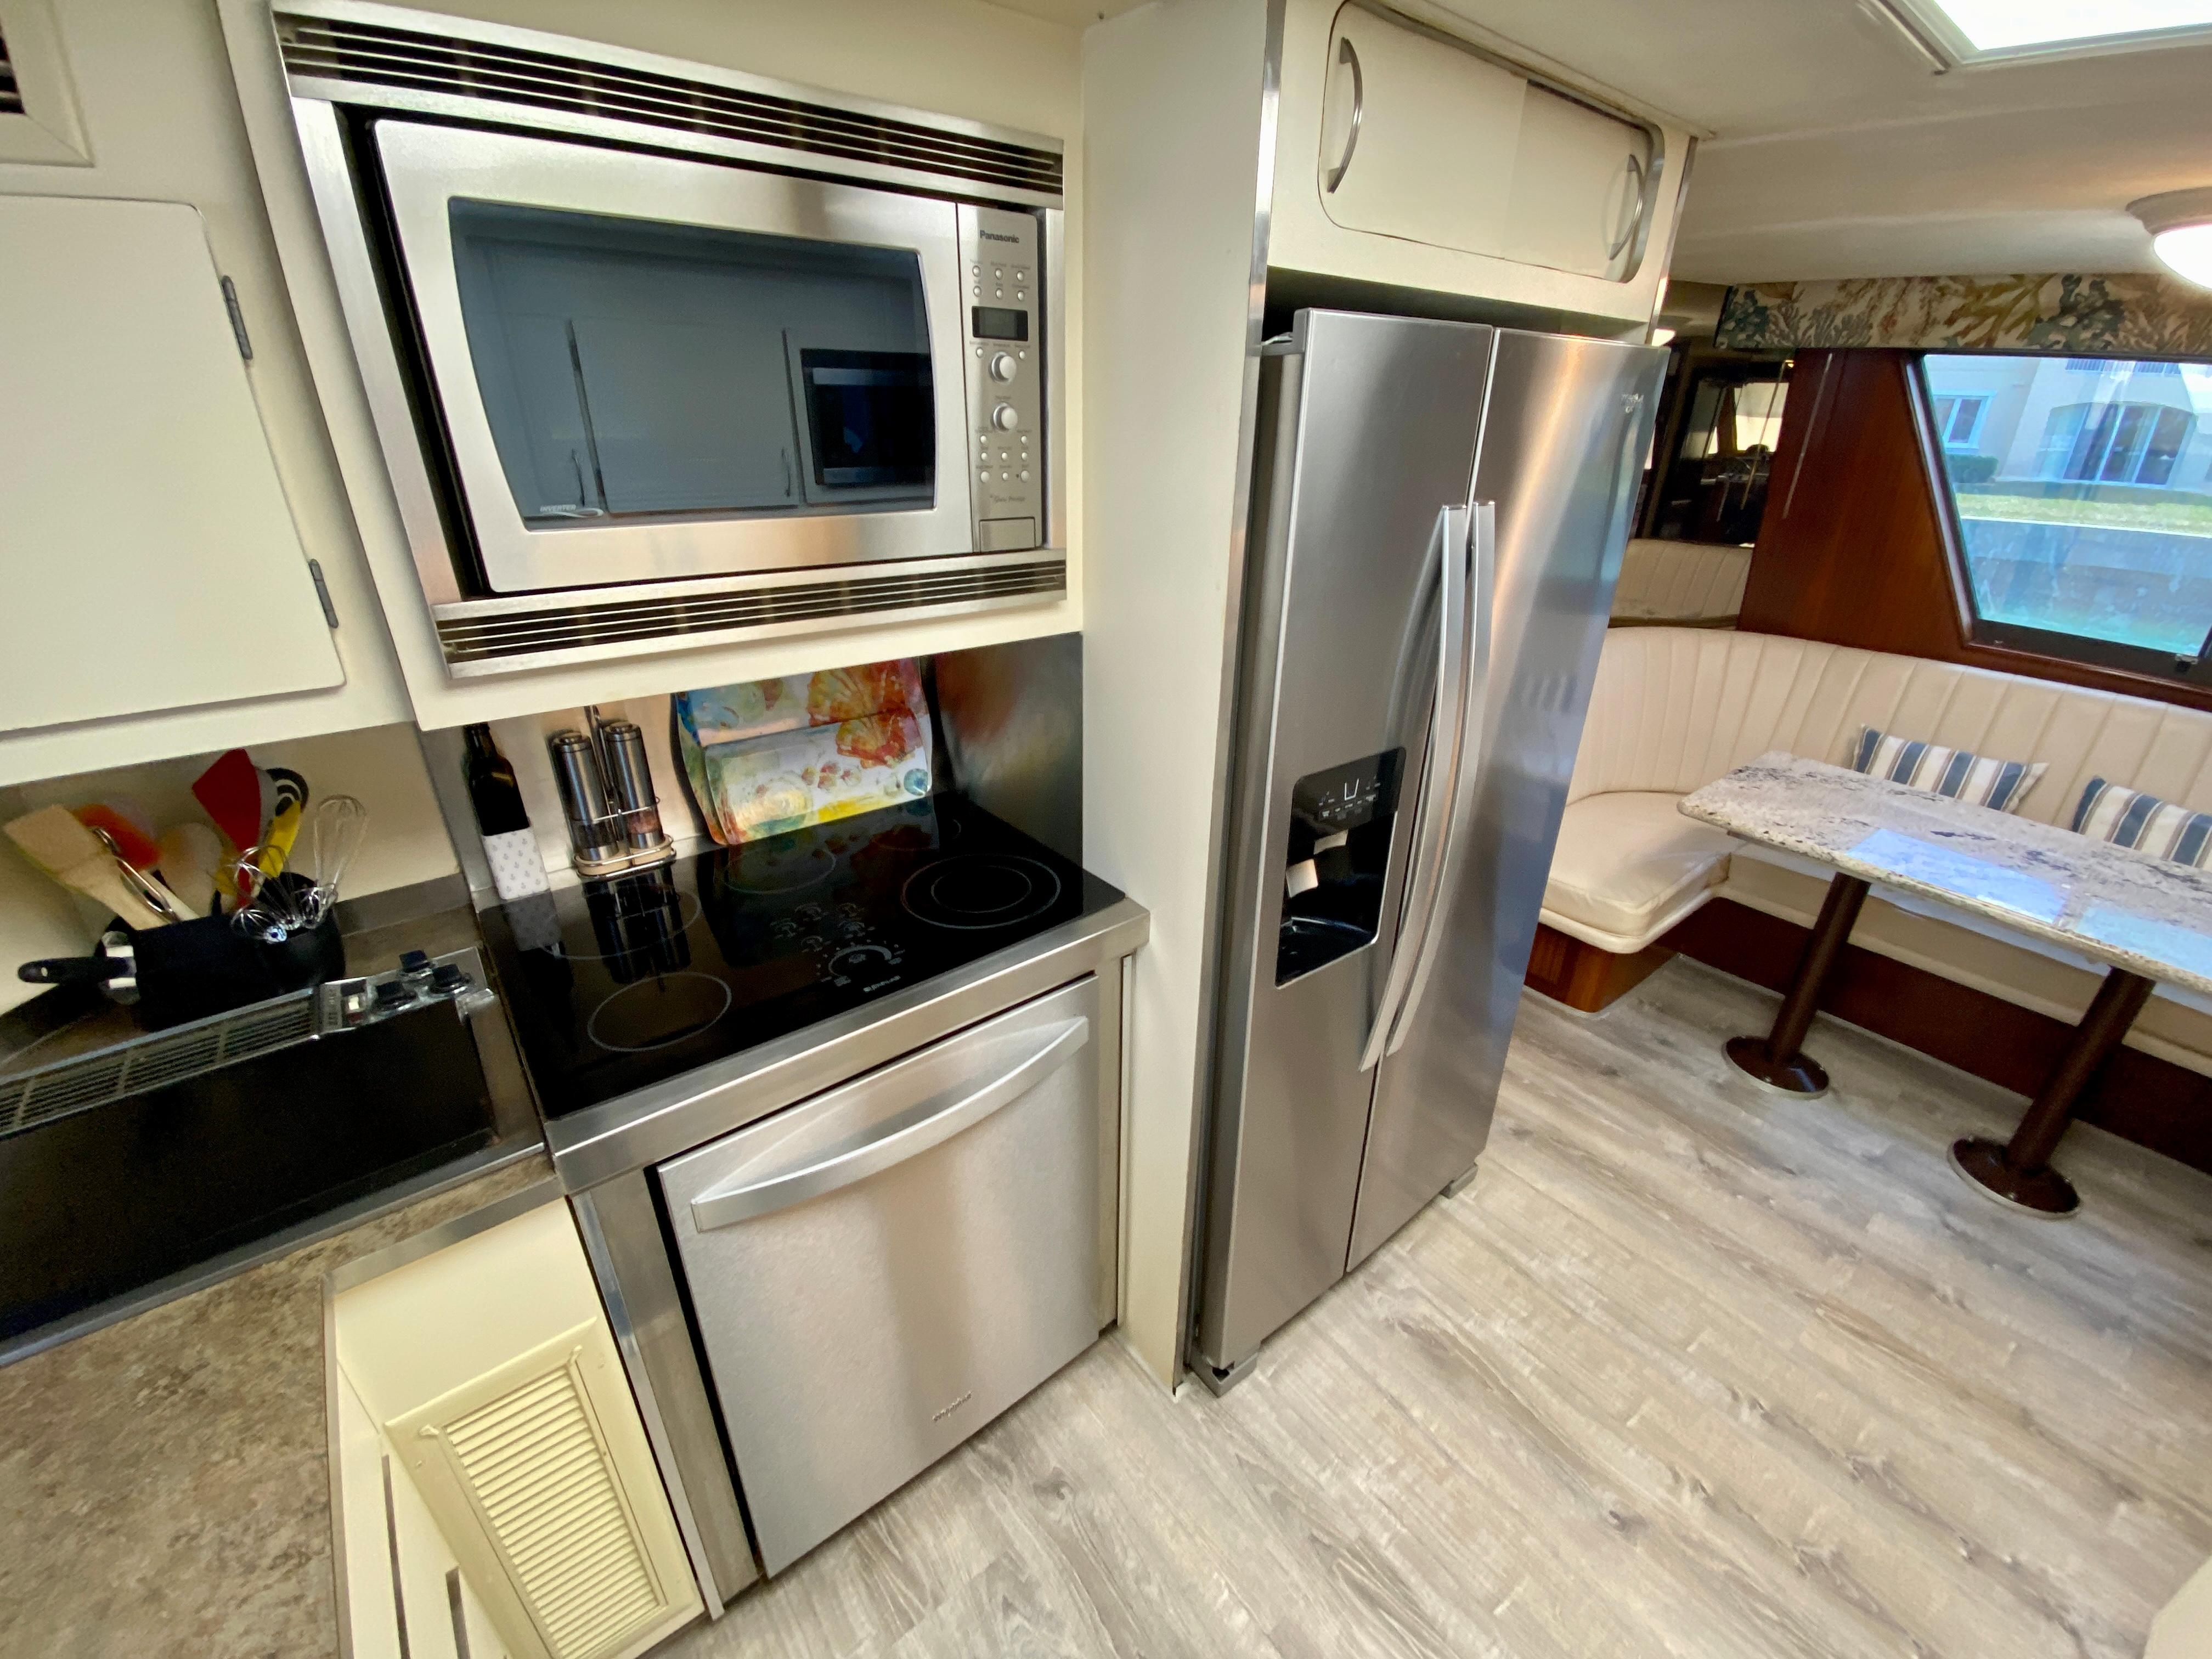 Hatteras 70 Conundrum - Galley, Microwave, Dishwasher and Refrigerator